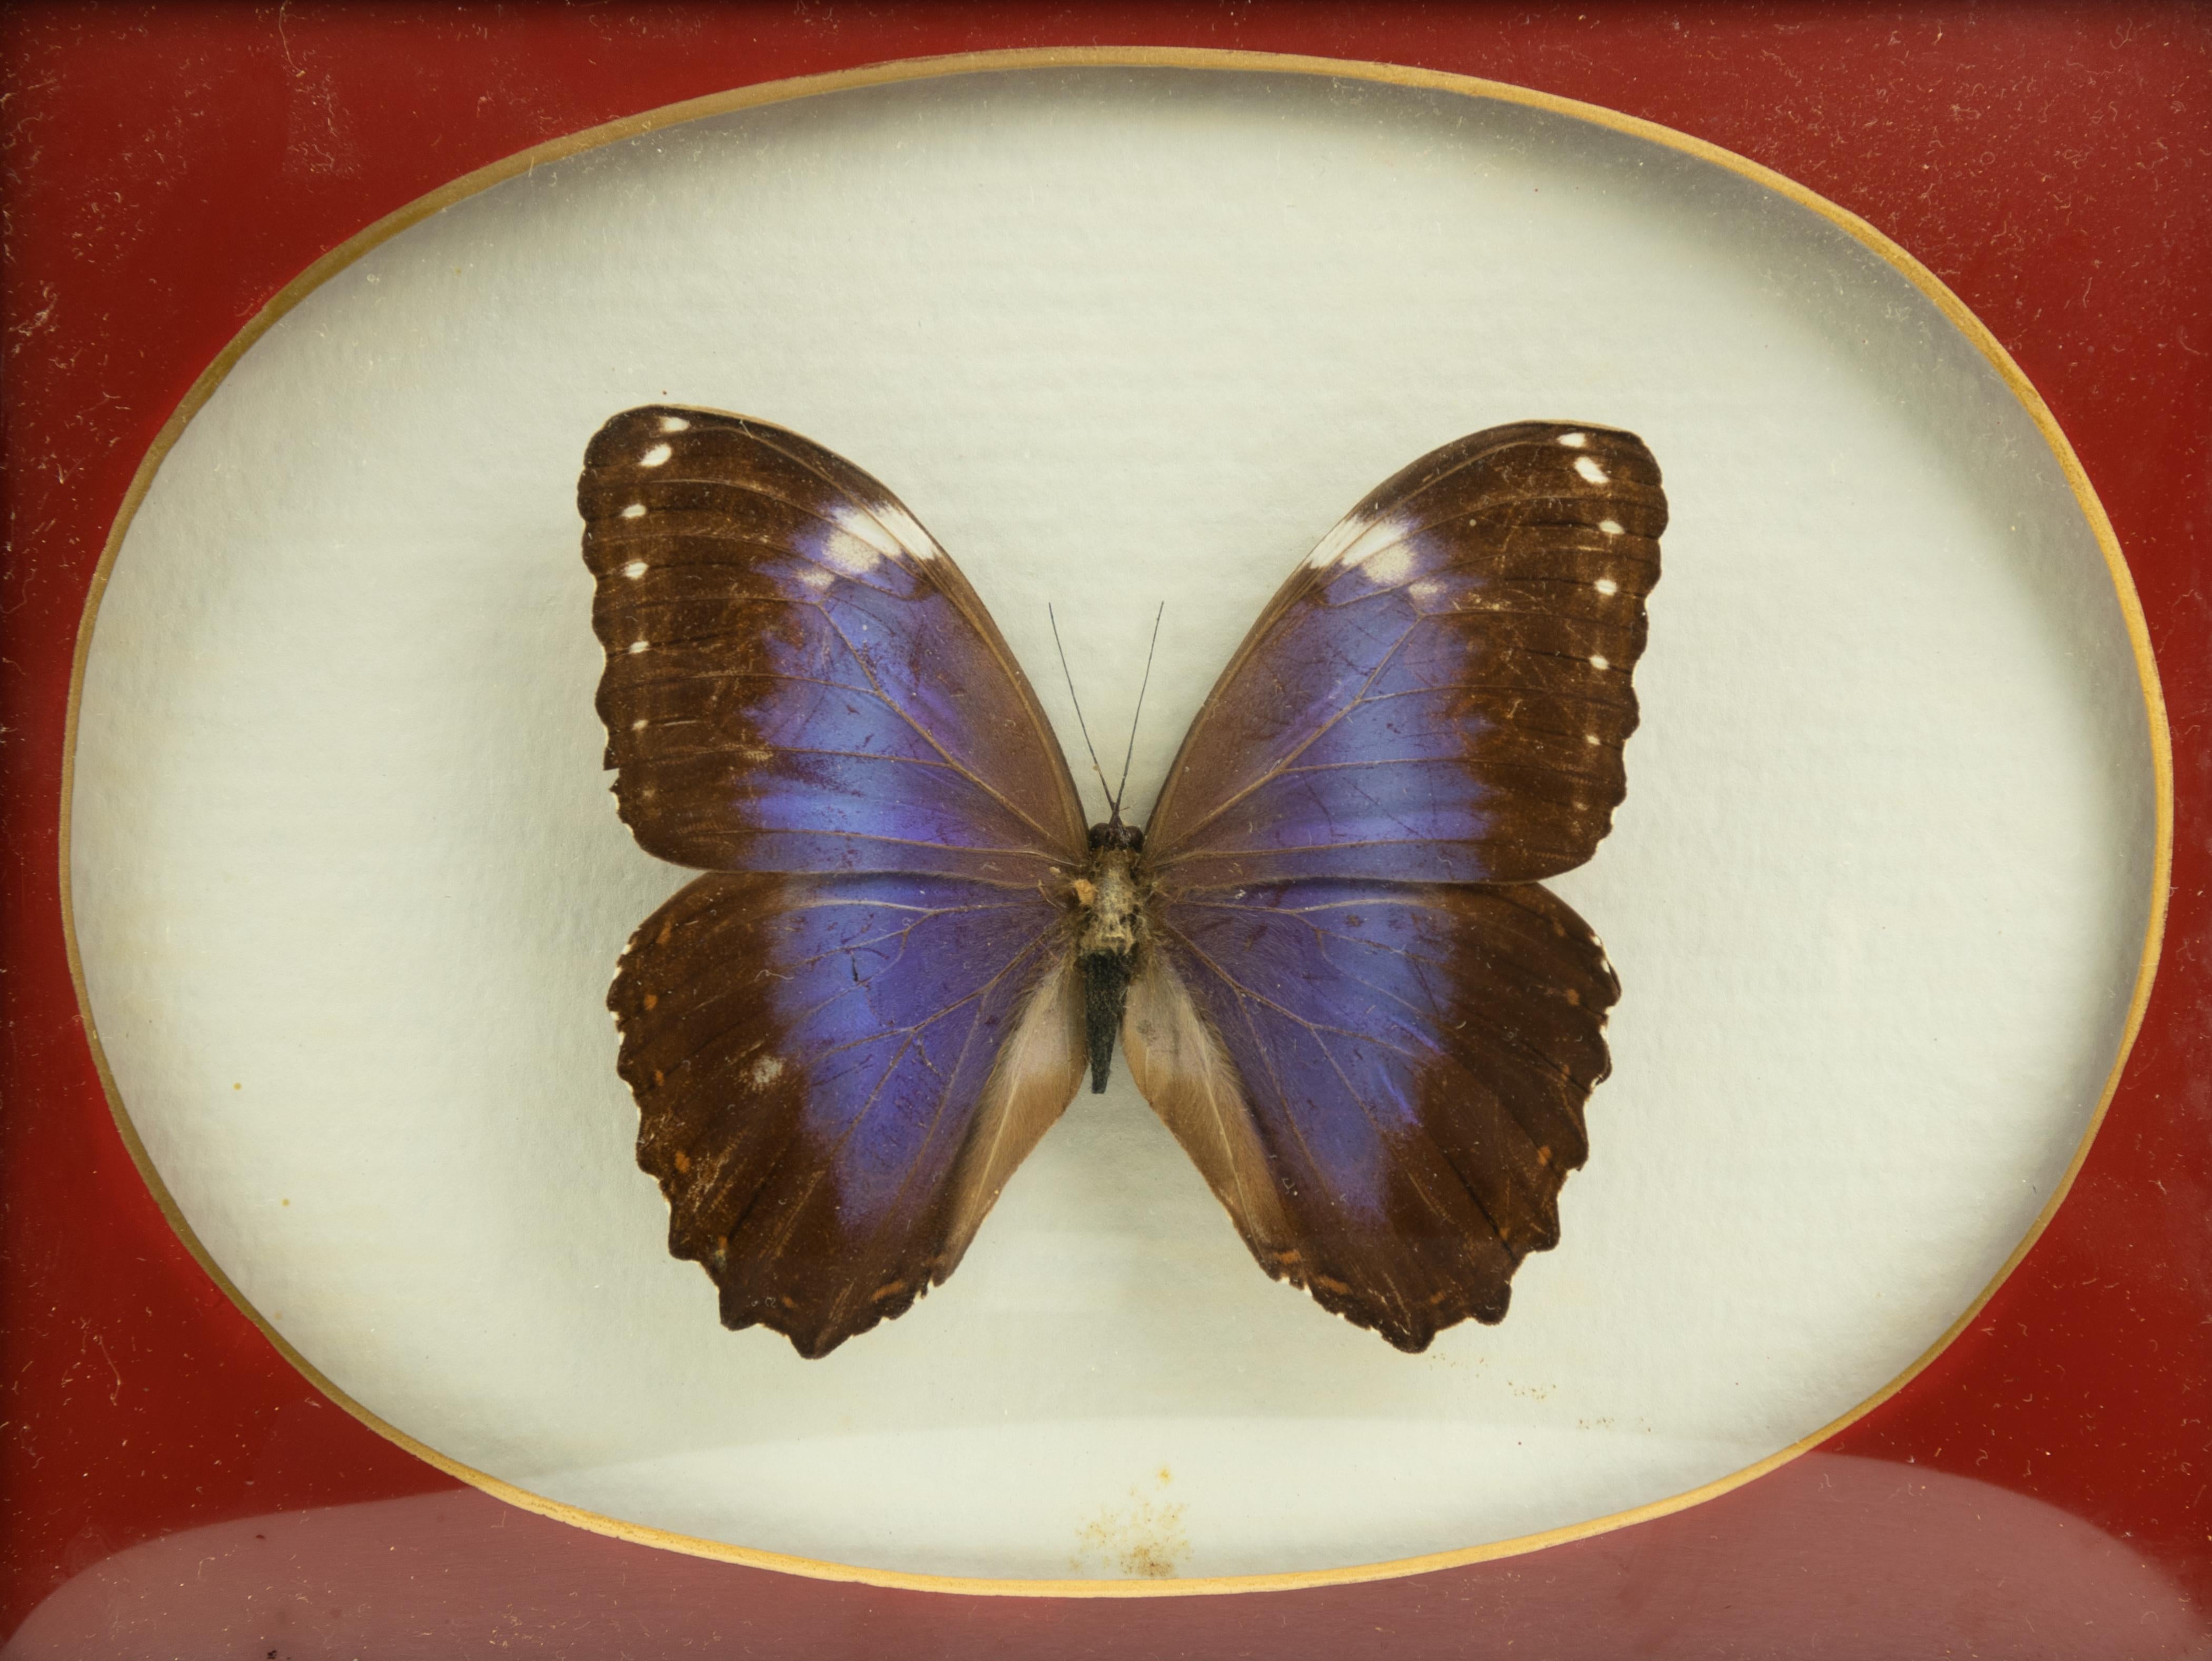 Morpho anassibia is a stuffed embalmed butterfly in a frame. 

Species Morpho anassibia blue.

19.5 x 25 cm.

Very good conditions!

 